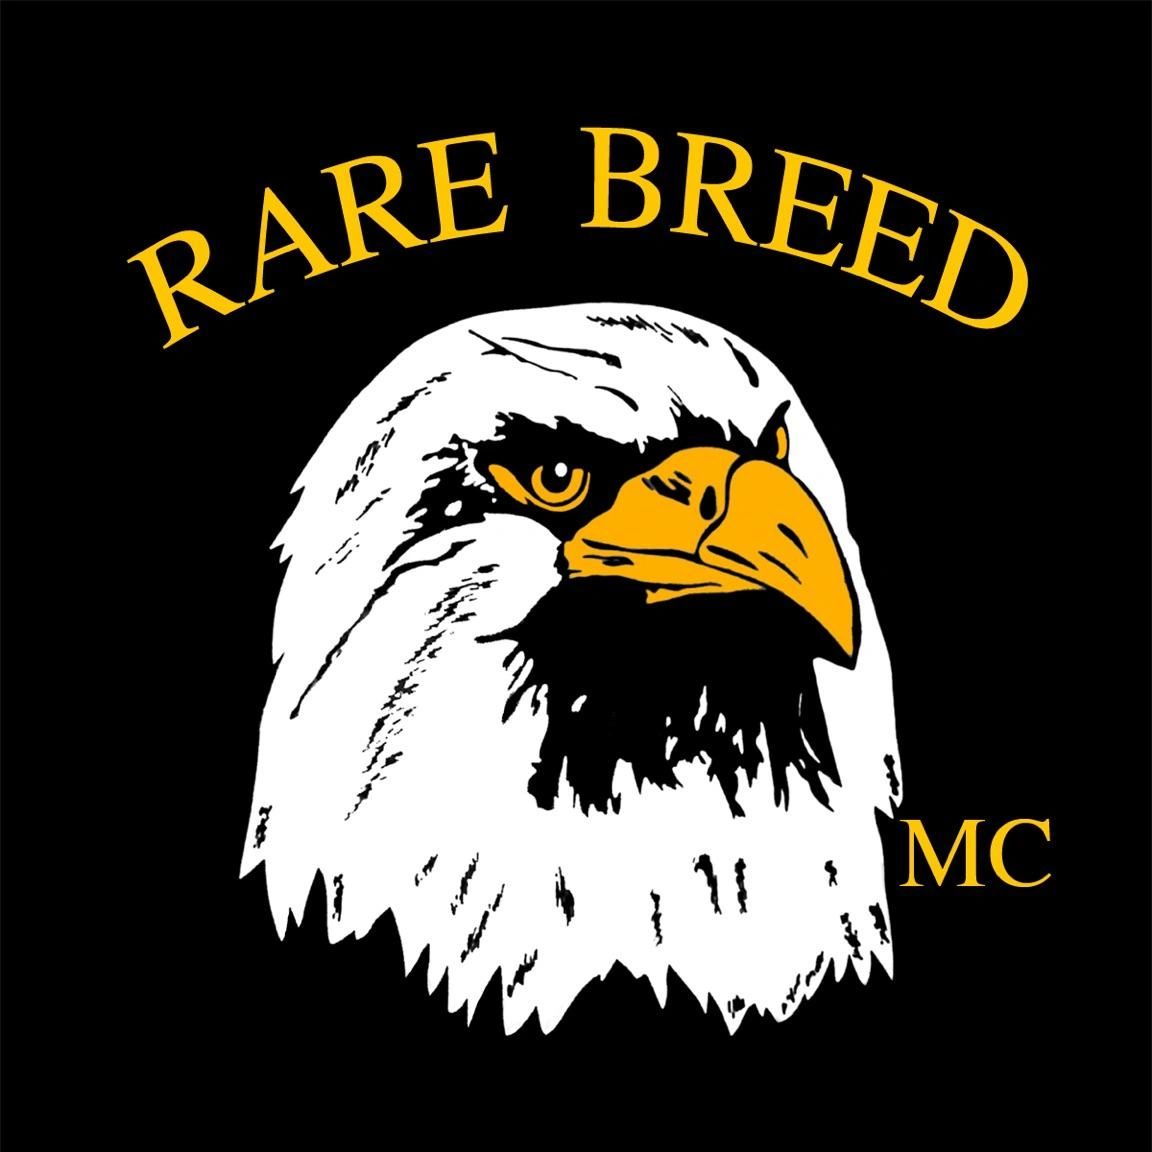 Rare breed mc chapters